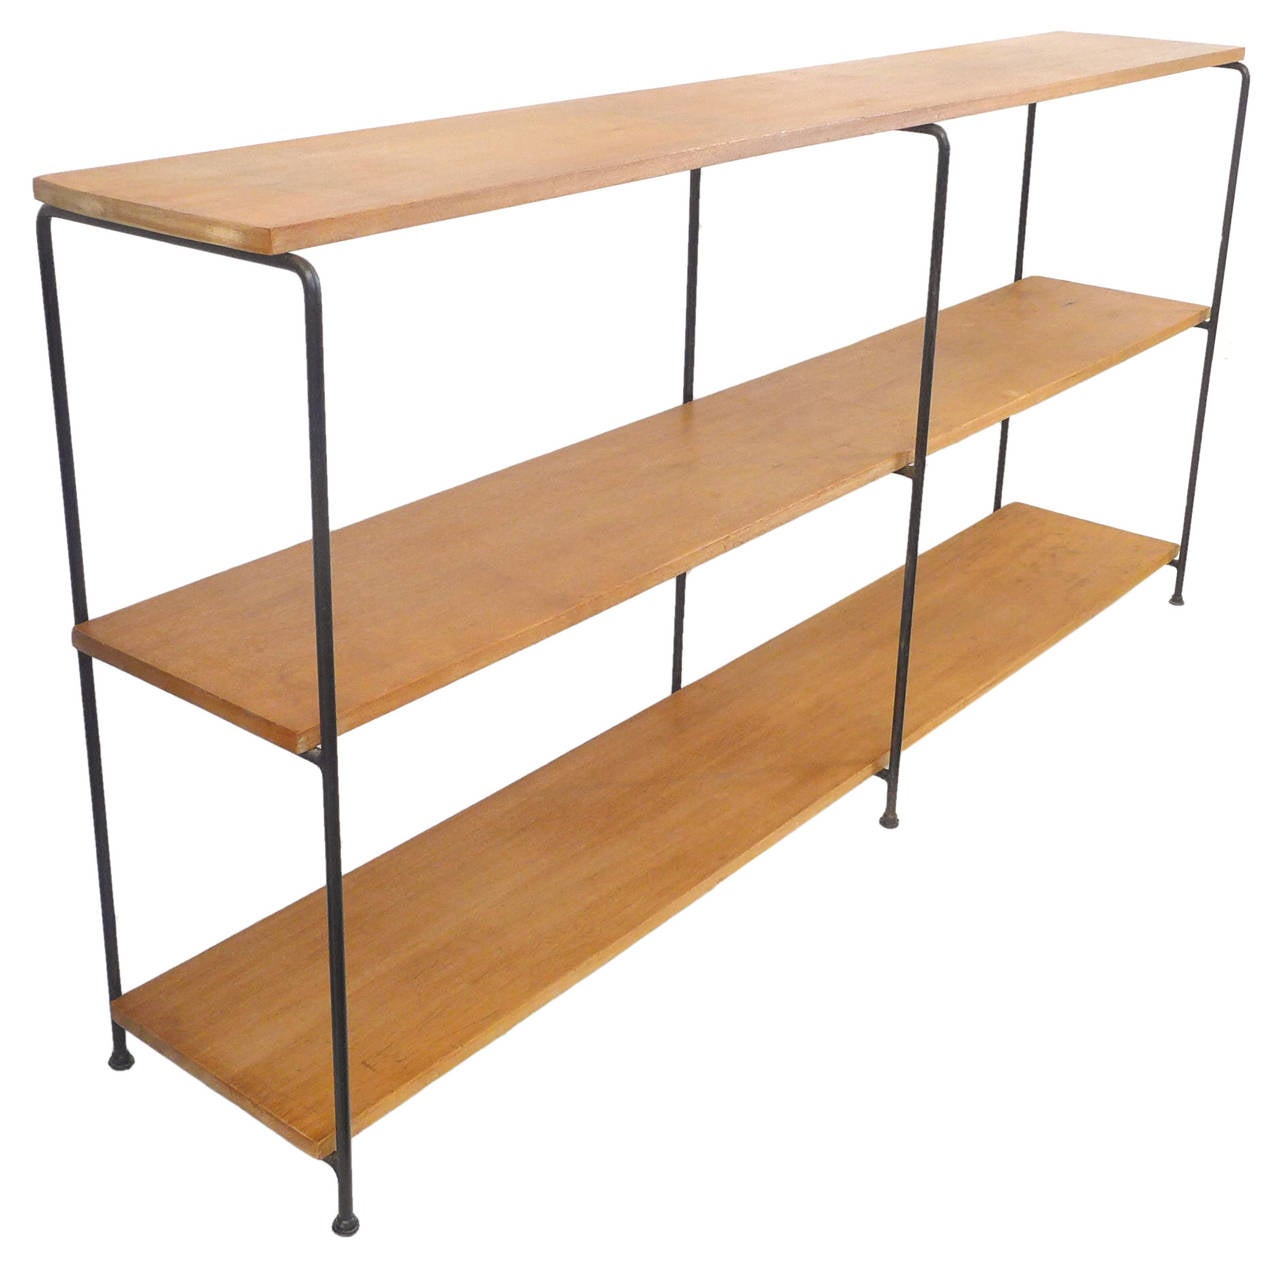 A Classic, Mid-Century shelving unit of wrought iron and solid mahogany planks. Highly reminiscent of the work of Muriel Coleman, a statement of beautiful simplicity and architectural design. Piece rests of its original, glider-pod feet and wears a